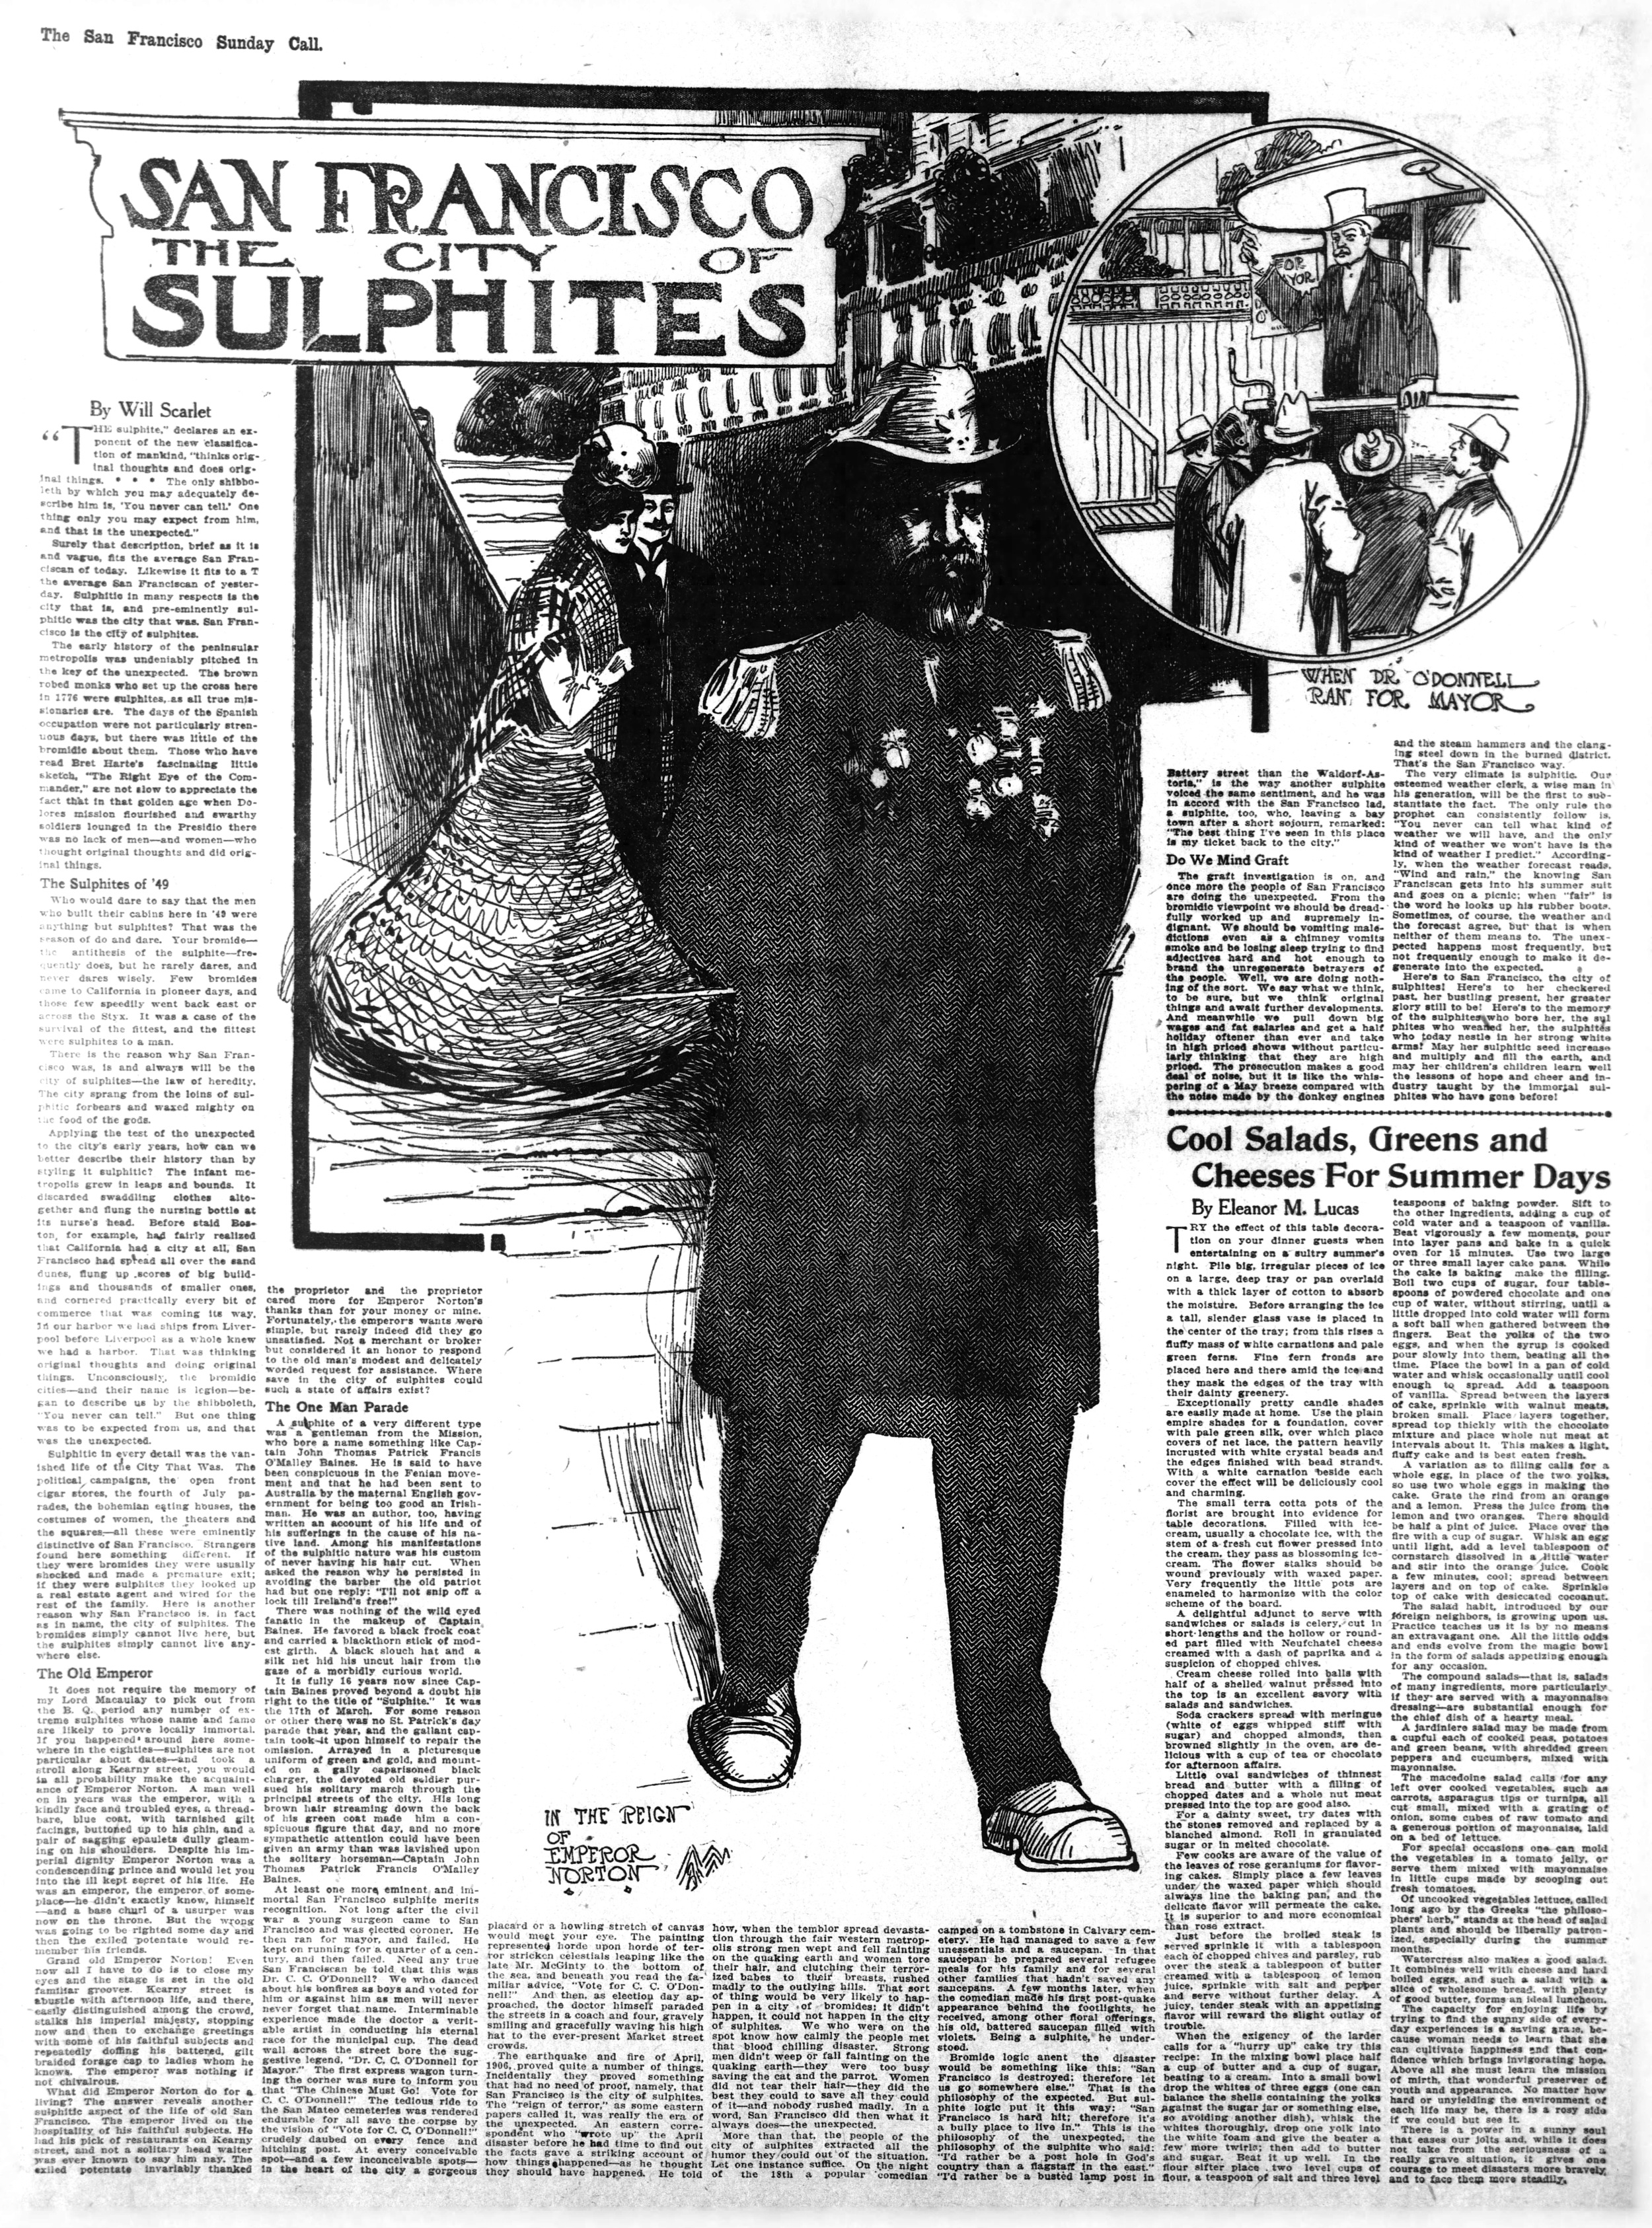   "In the Reign of Emperor Norton," in the  San Francisco Call  newspaper of Sunday 18 August 1907.  Artwork for article, "San Francisco: The City of Sulphites," by Will Scarlet. Source:  California Digital Newspaper Collection . [Added 7.22.2016] 